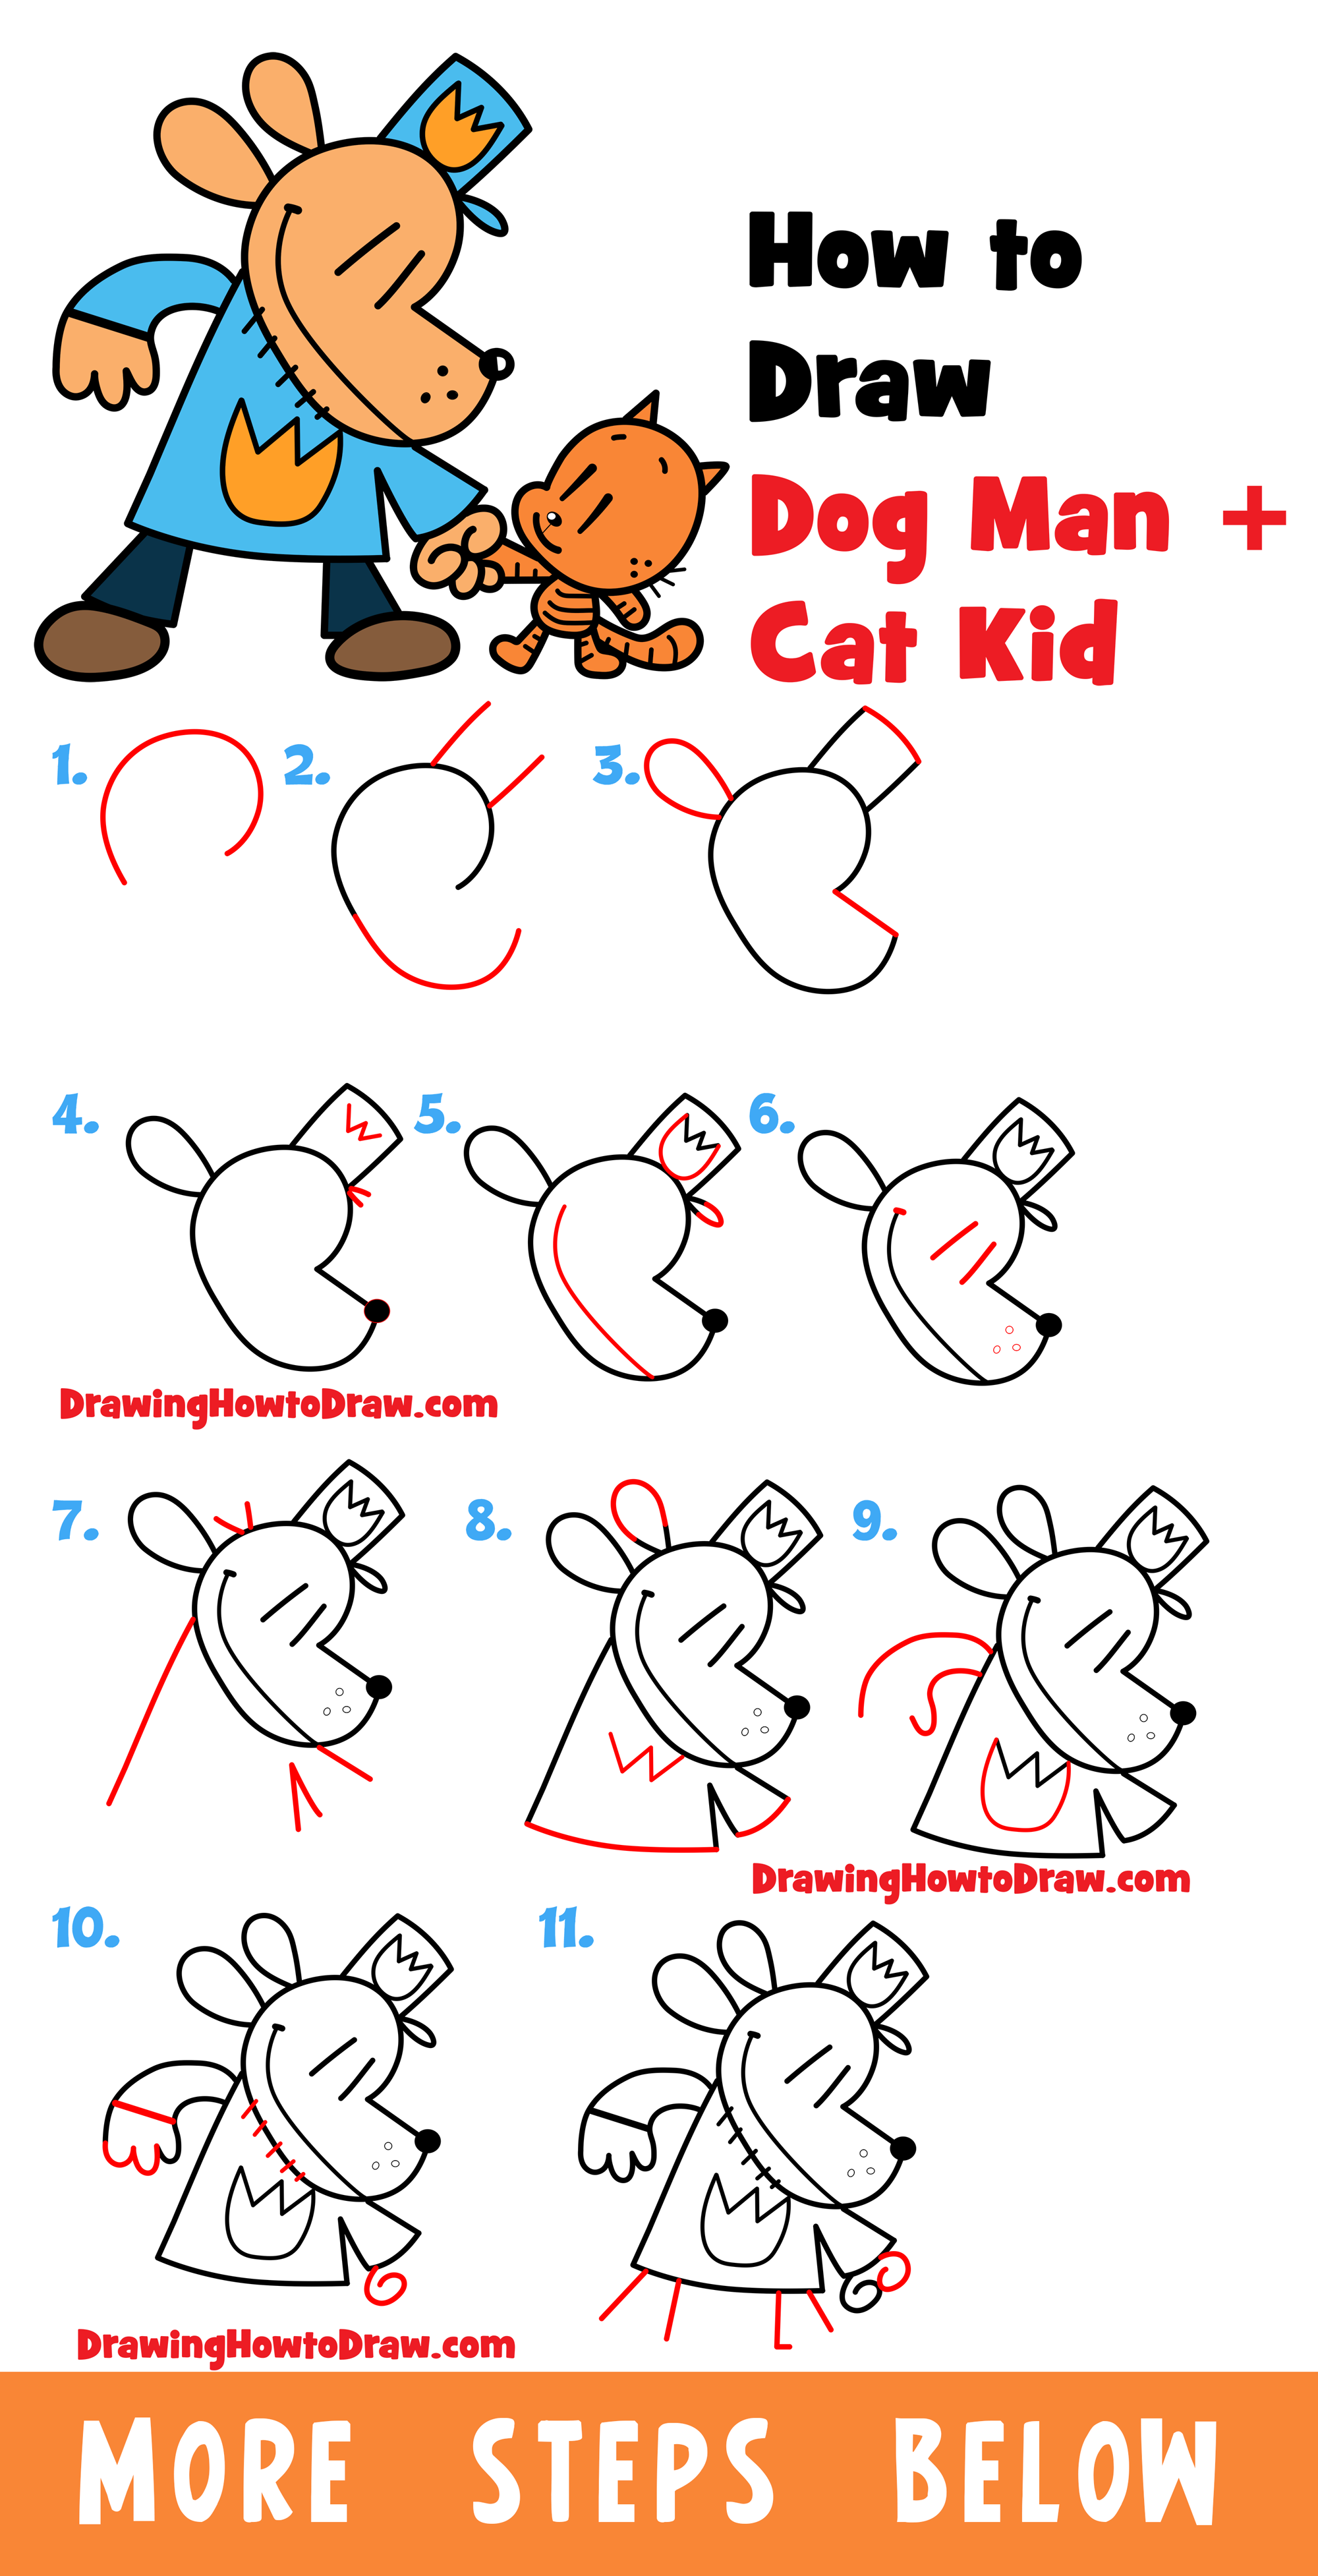 How to Draw Dog Man and Cat Kid Holding Hands with Easy Step-by-Step Drawing Tutorial for Kids